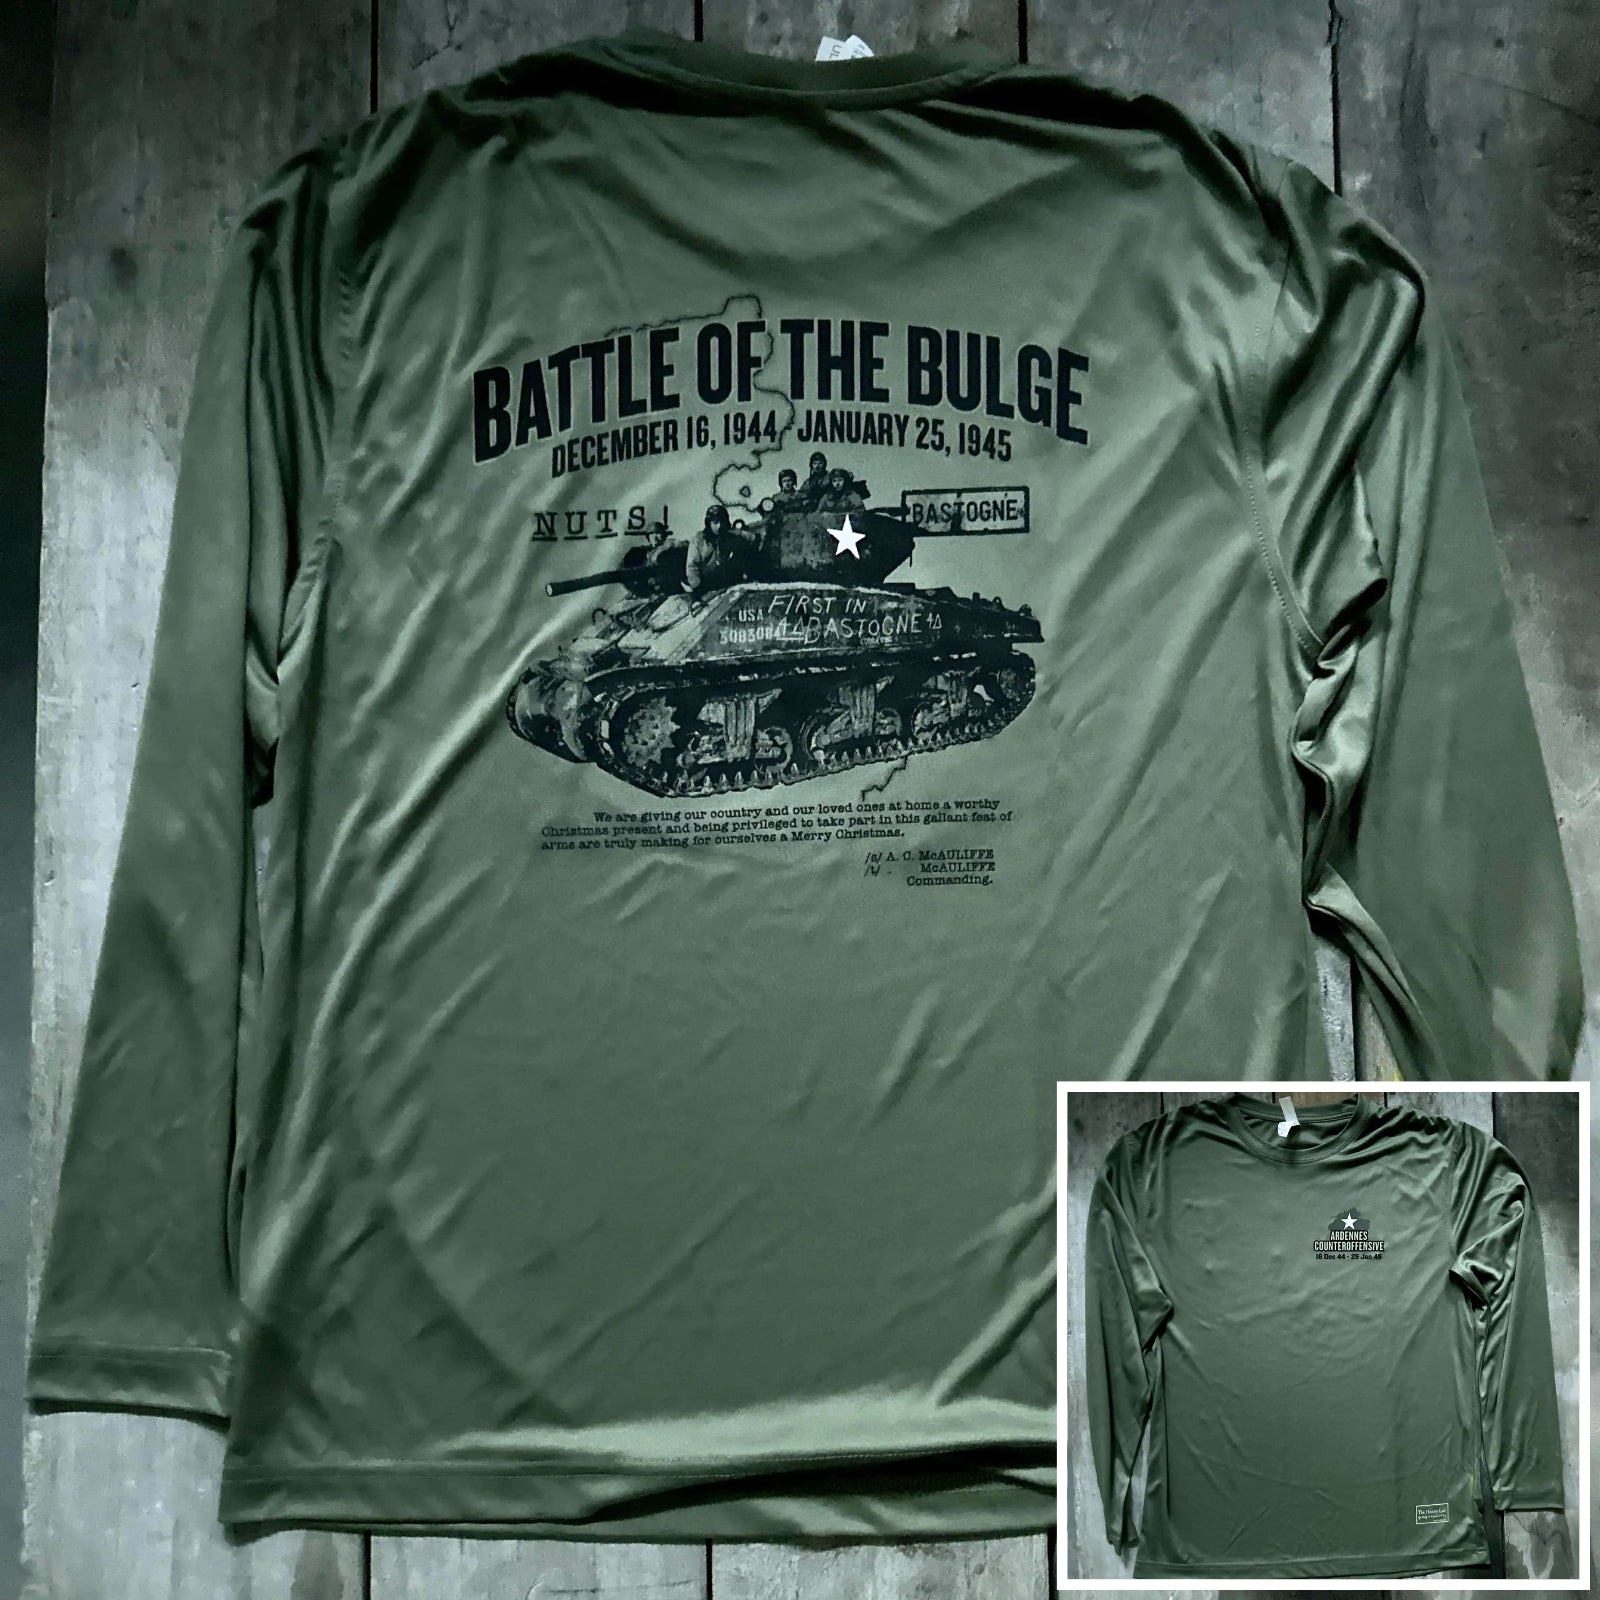 The Battle of the Bulge moisture-wicking UV shirt from The History List store